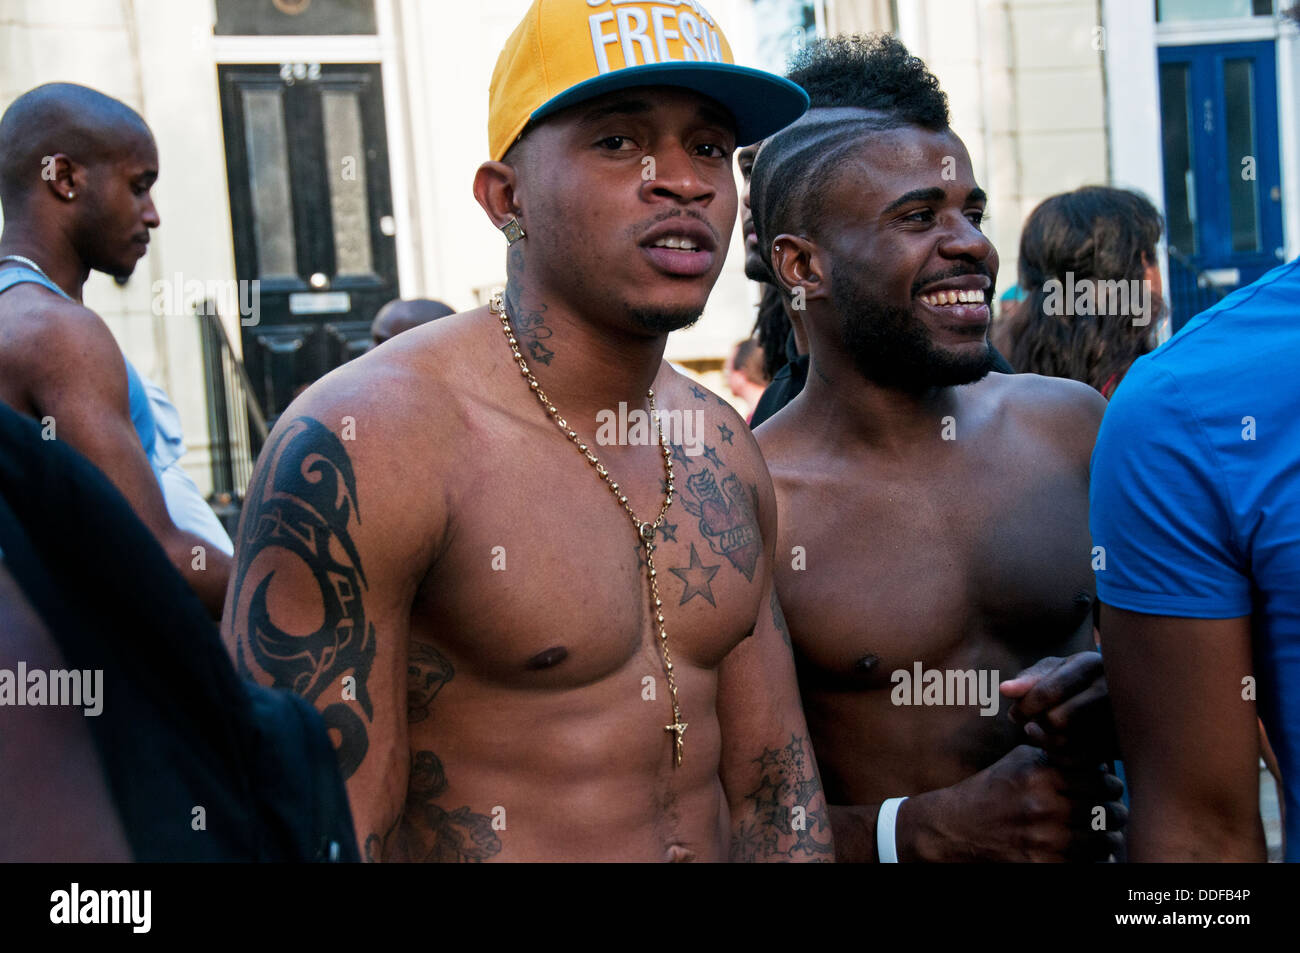 West Indian young men with tattoos partaking in Notting Hill Carnival ...